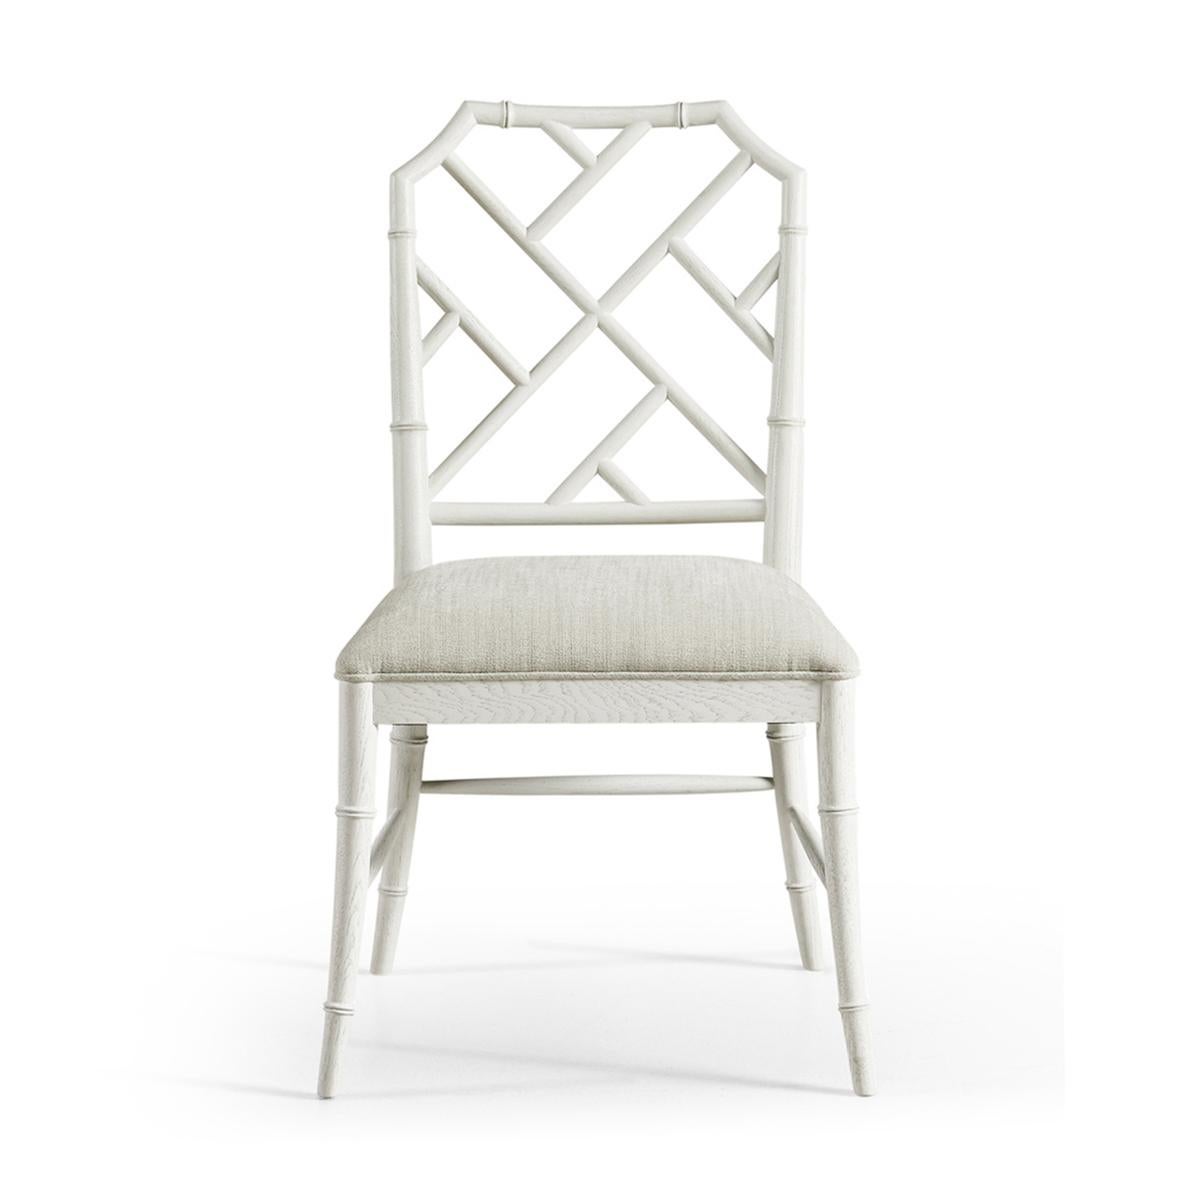 Chippendale bamboo dining chair, this timeless geometric design lattice back bamboo formed dining side chair is finished in dry chalk white with light distressing. Upholstered in earthy oatmeal performance fabric, the chairs will add comfort and